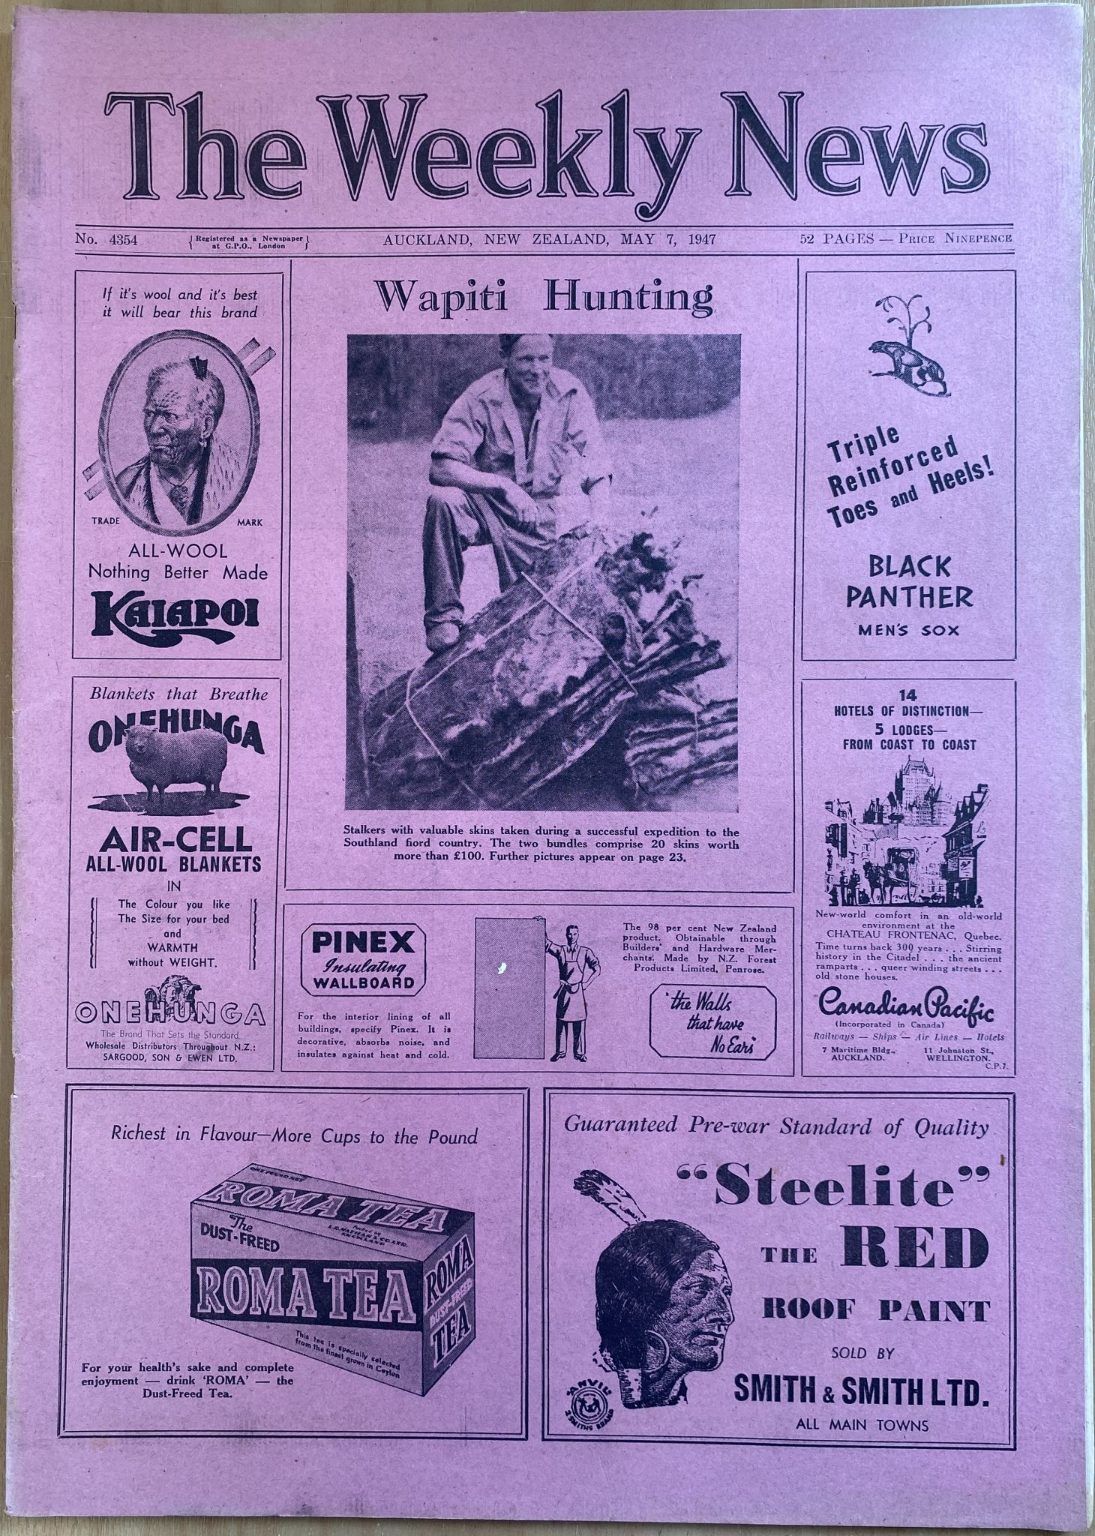 OLD NEWSPAPER: The Weekly News, No. 4354, 7 May 1947